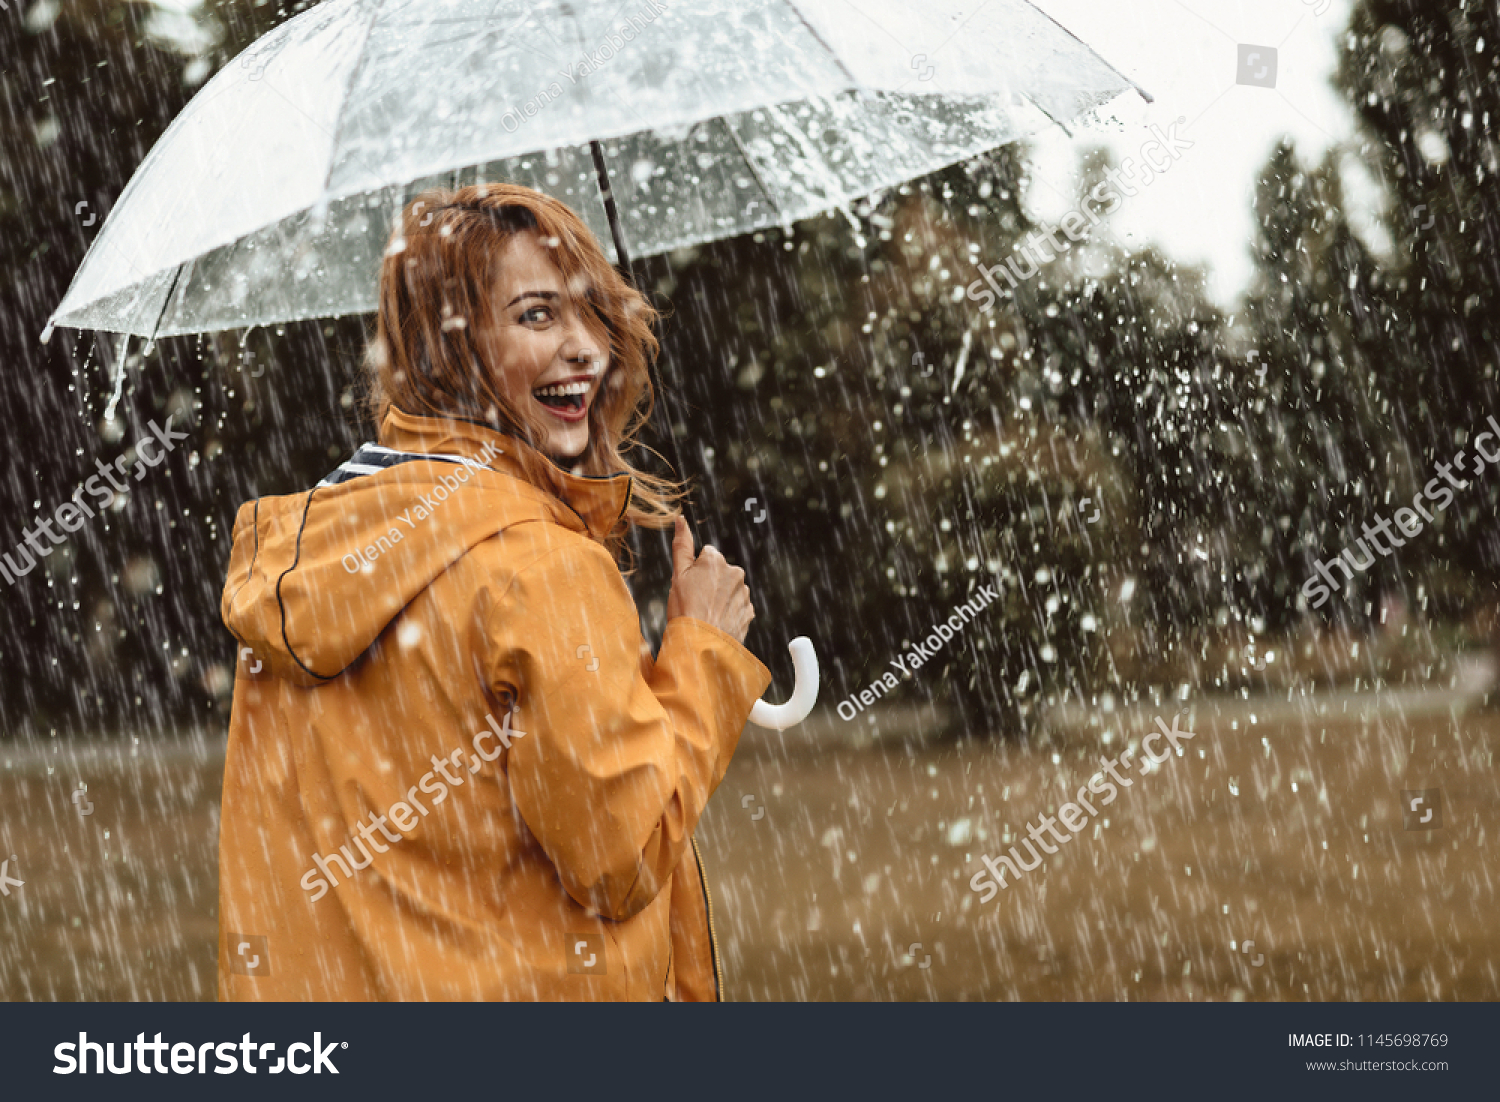 Cheerful pretty girl holding umbrella while strolling outside. She is turning back and looking at camera with true delight and sincere smile. Copy space in right side #1145698769